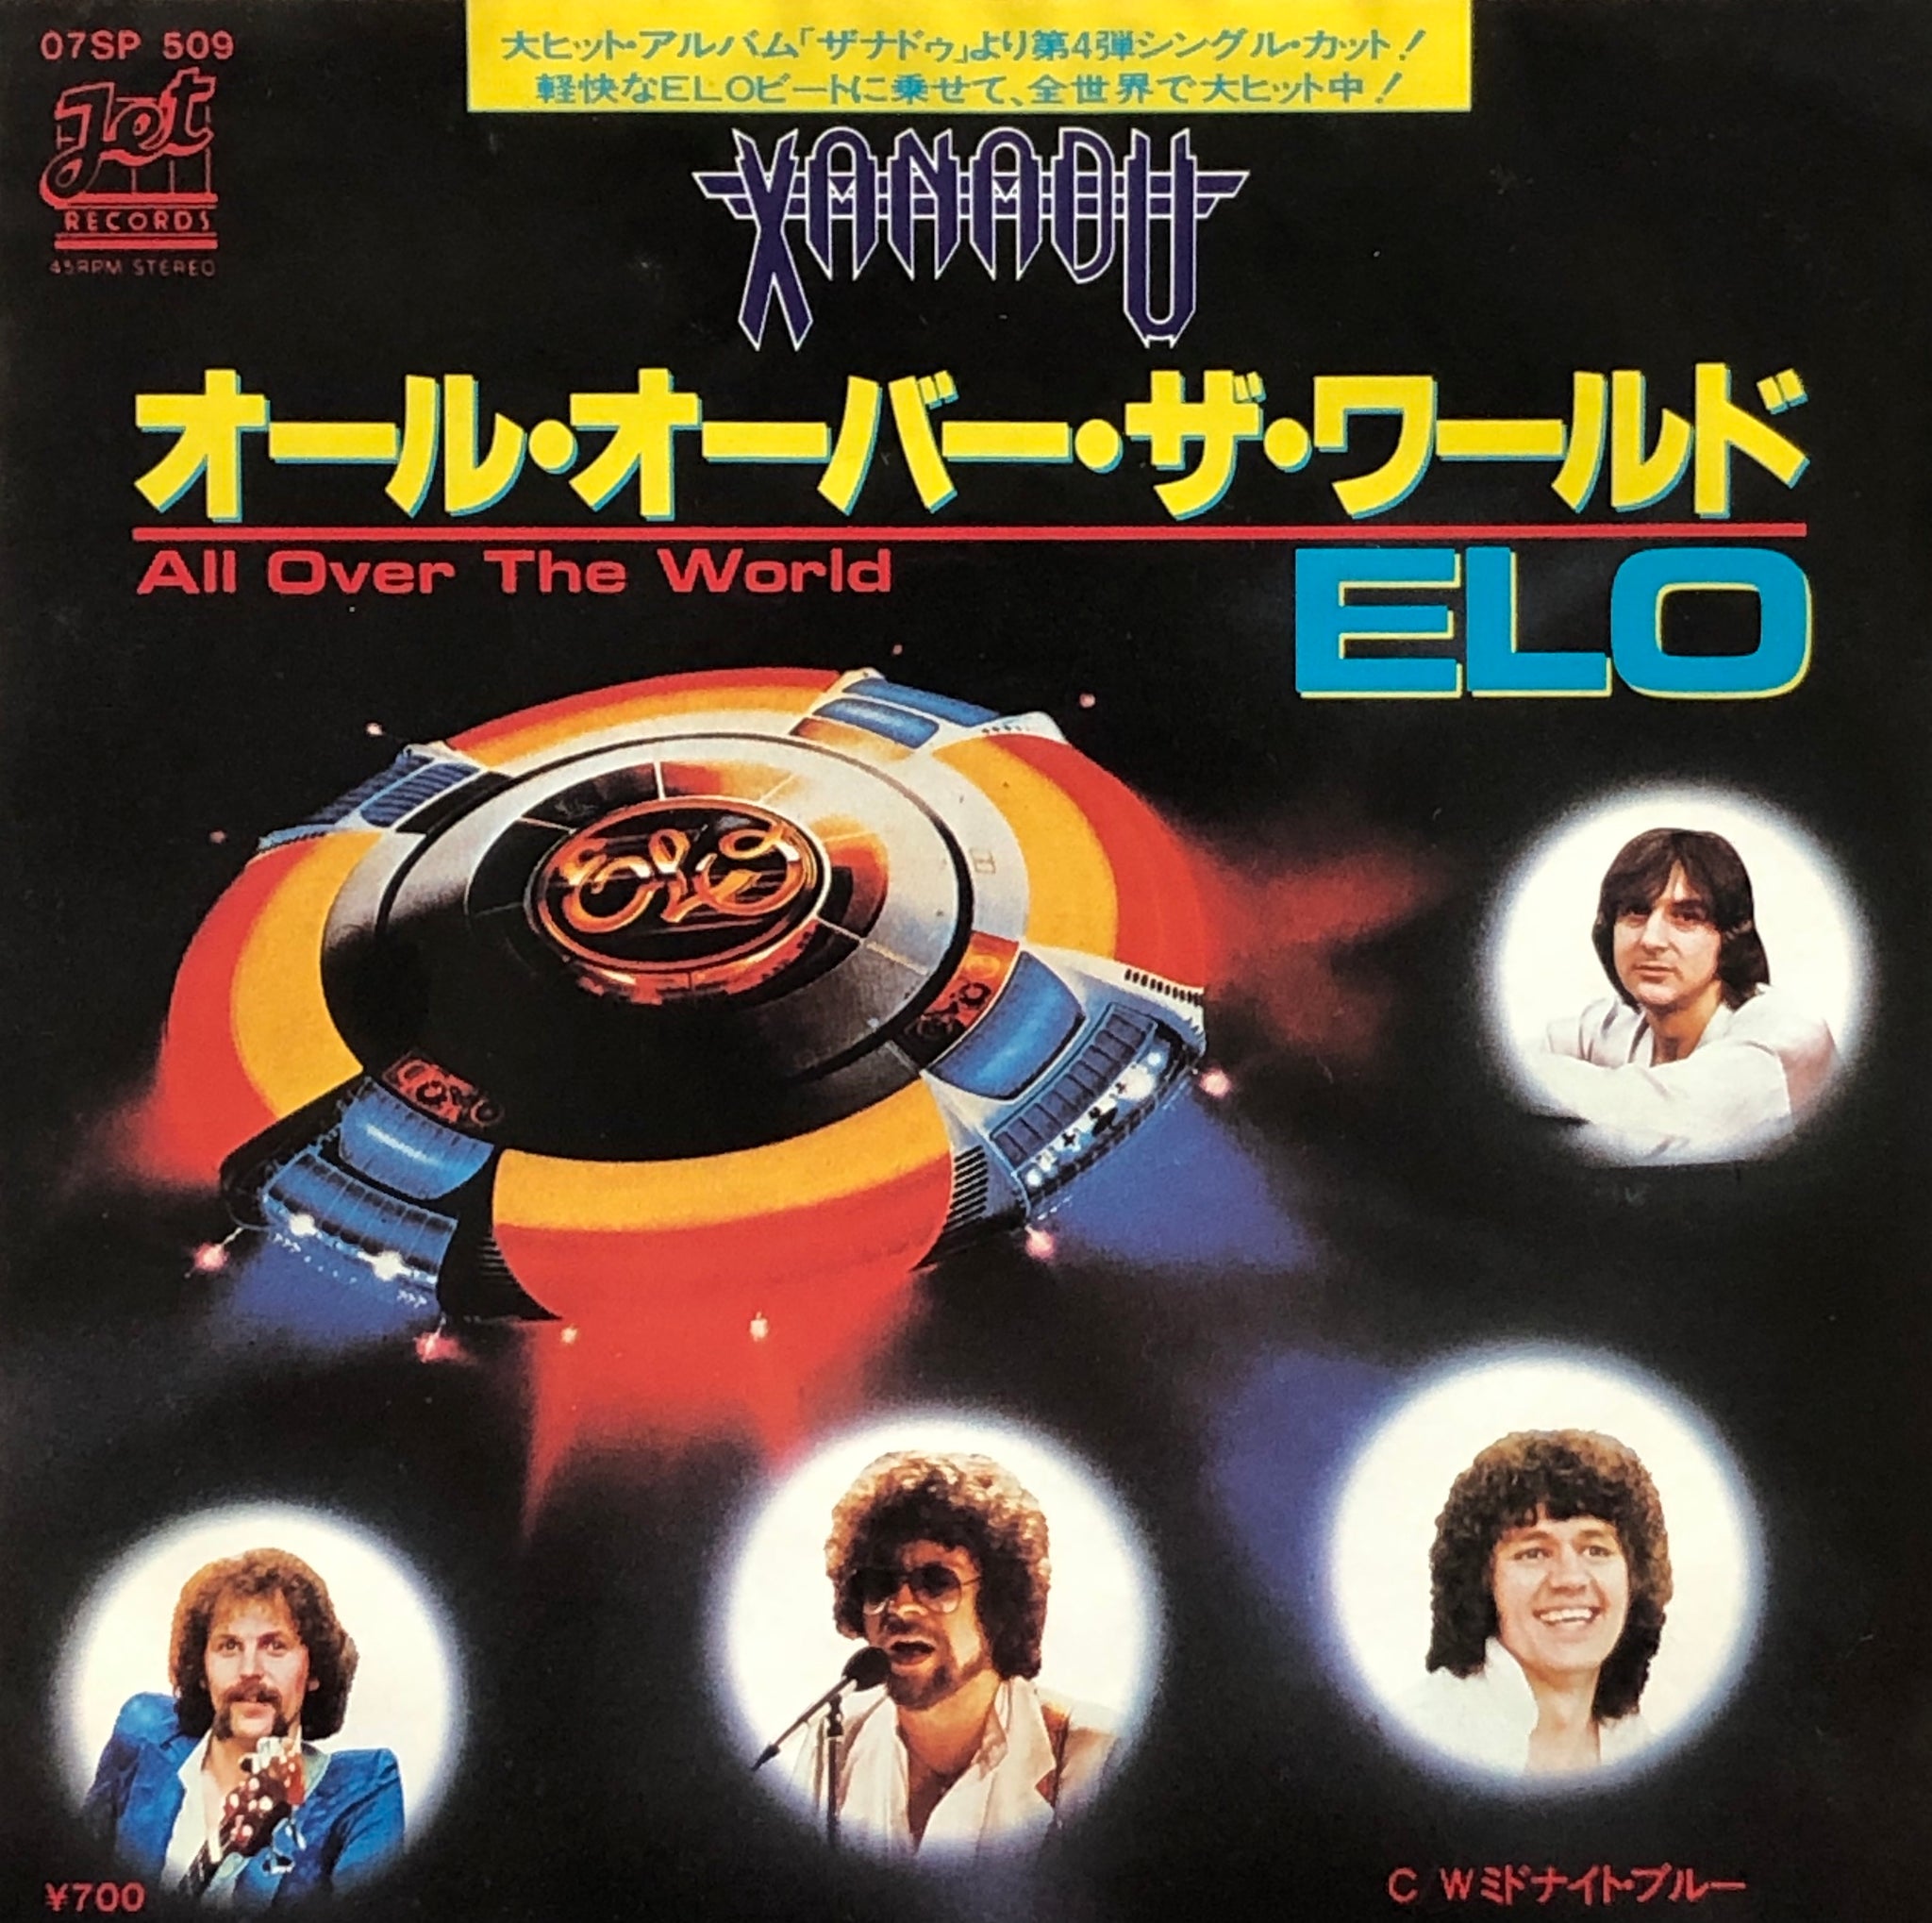 ELECTRIC LIGHT ORCHESTRA (ELO) / All Over The World (07SP 509)